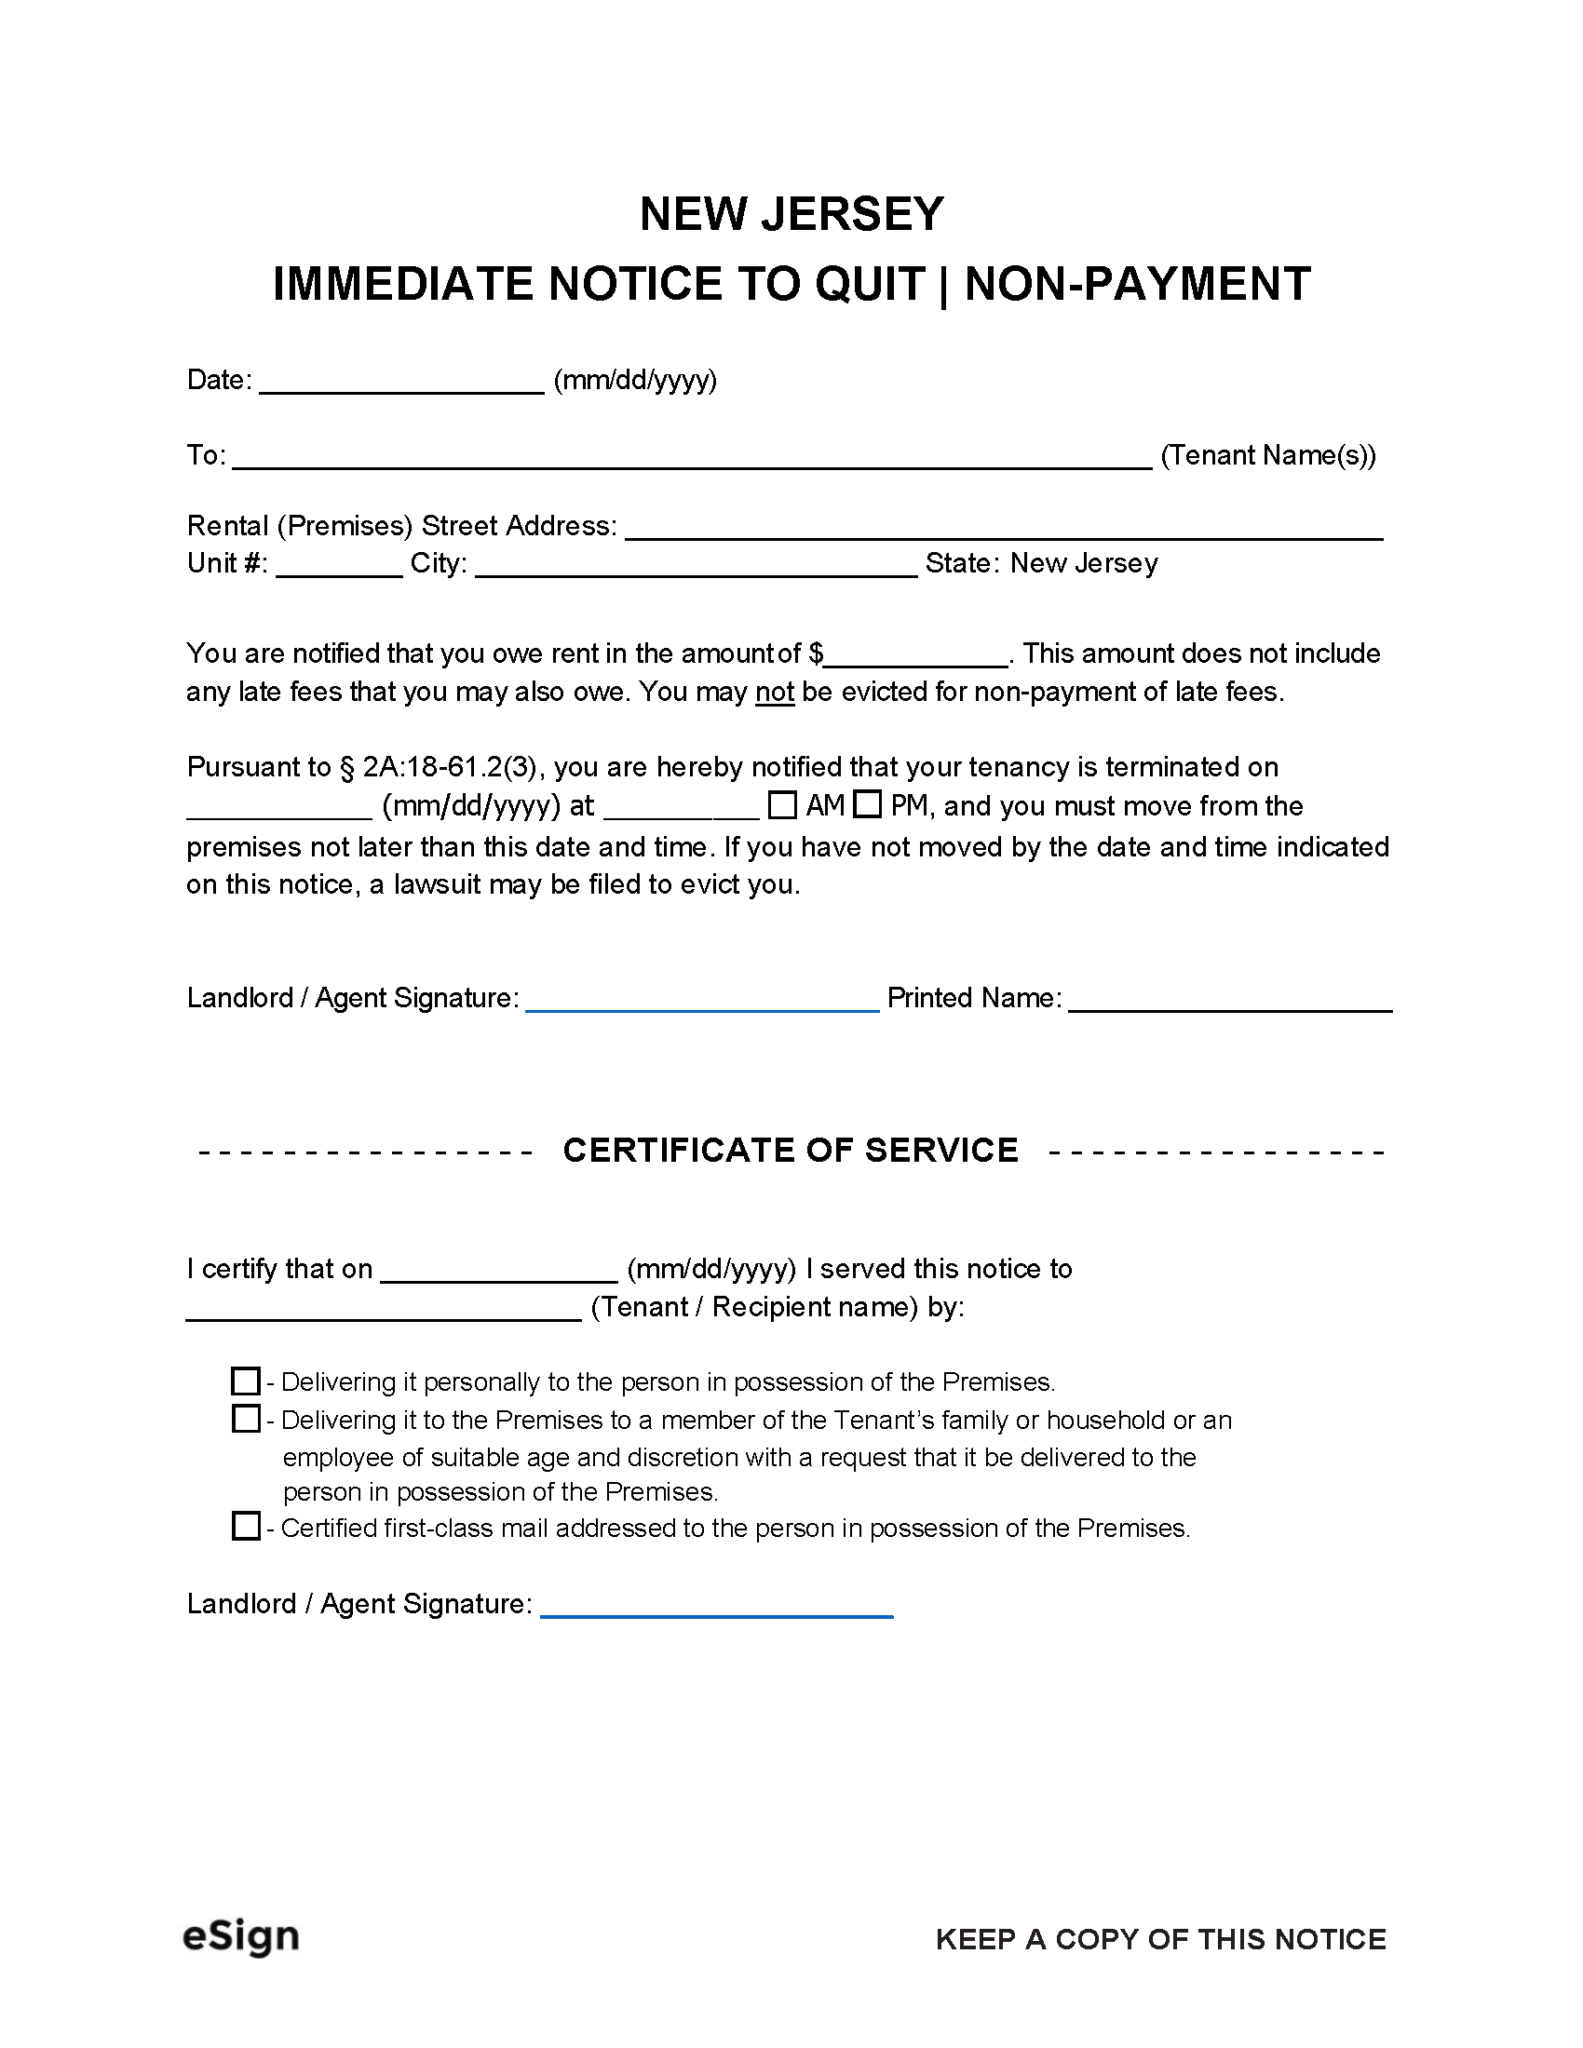 free-new-jersey-immediate-notice-to-quit-non-payment-pdf-word